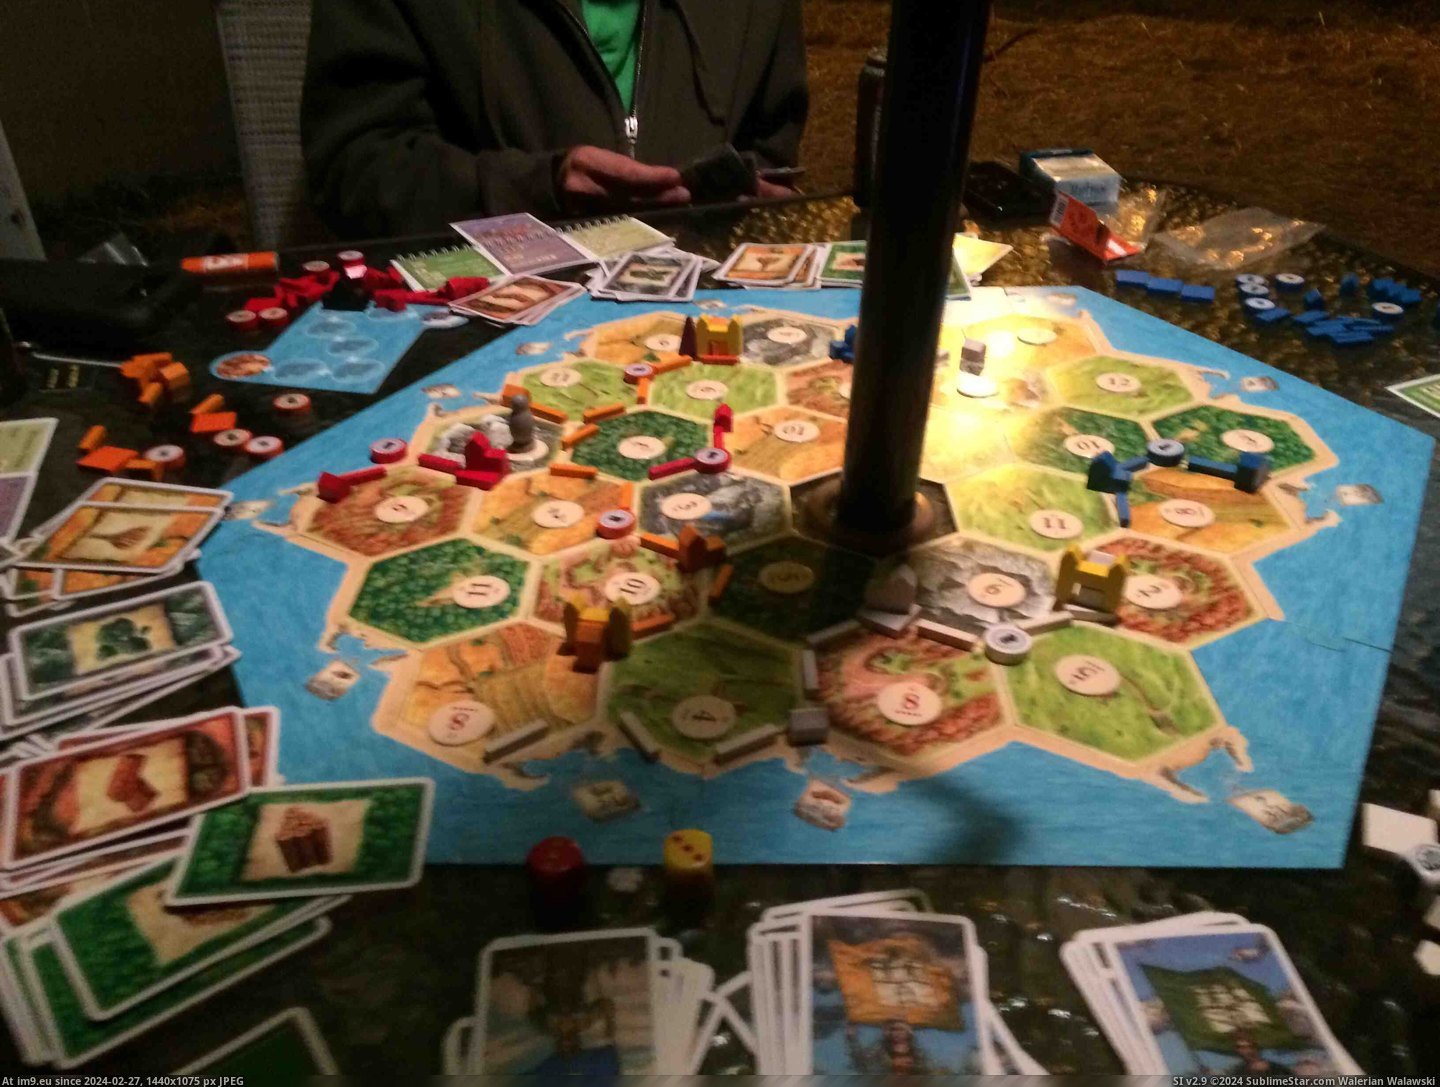 #Gaming #One #Night #Patio #Tables #Settlers #Catan #Played #Center #Umbrella [Gaming] we played settlers of catan outside last night on one of those patio tables with an umbrella in the center Pic. (Изображение из альбом My r/GAMING favs))